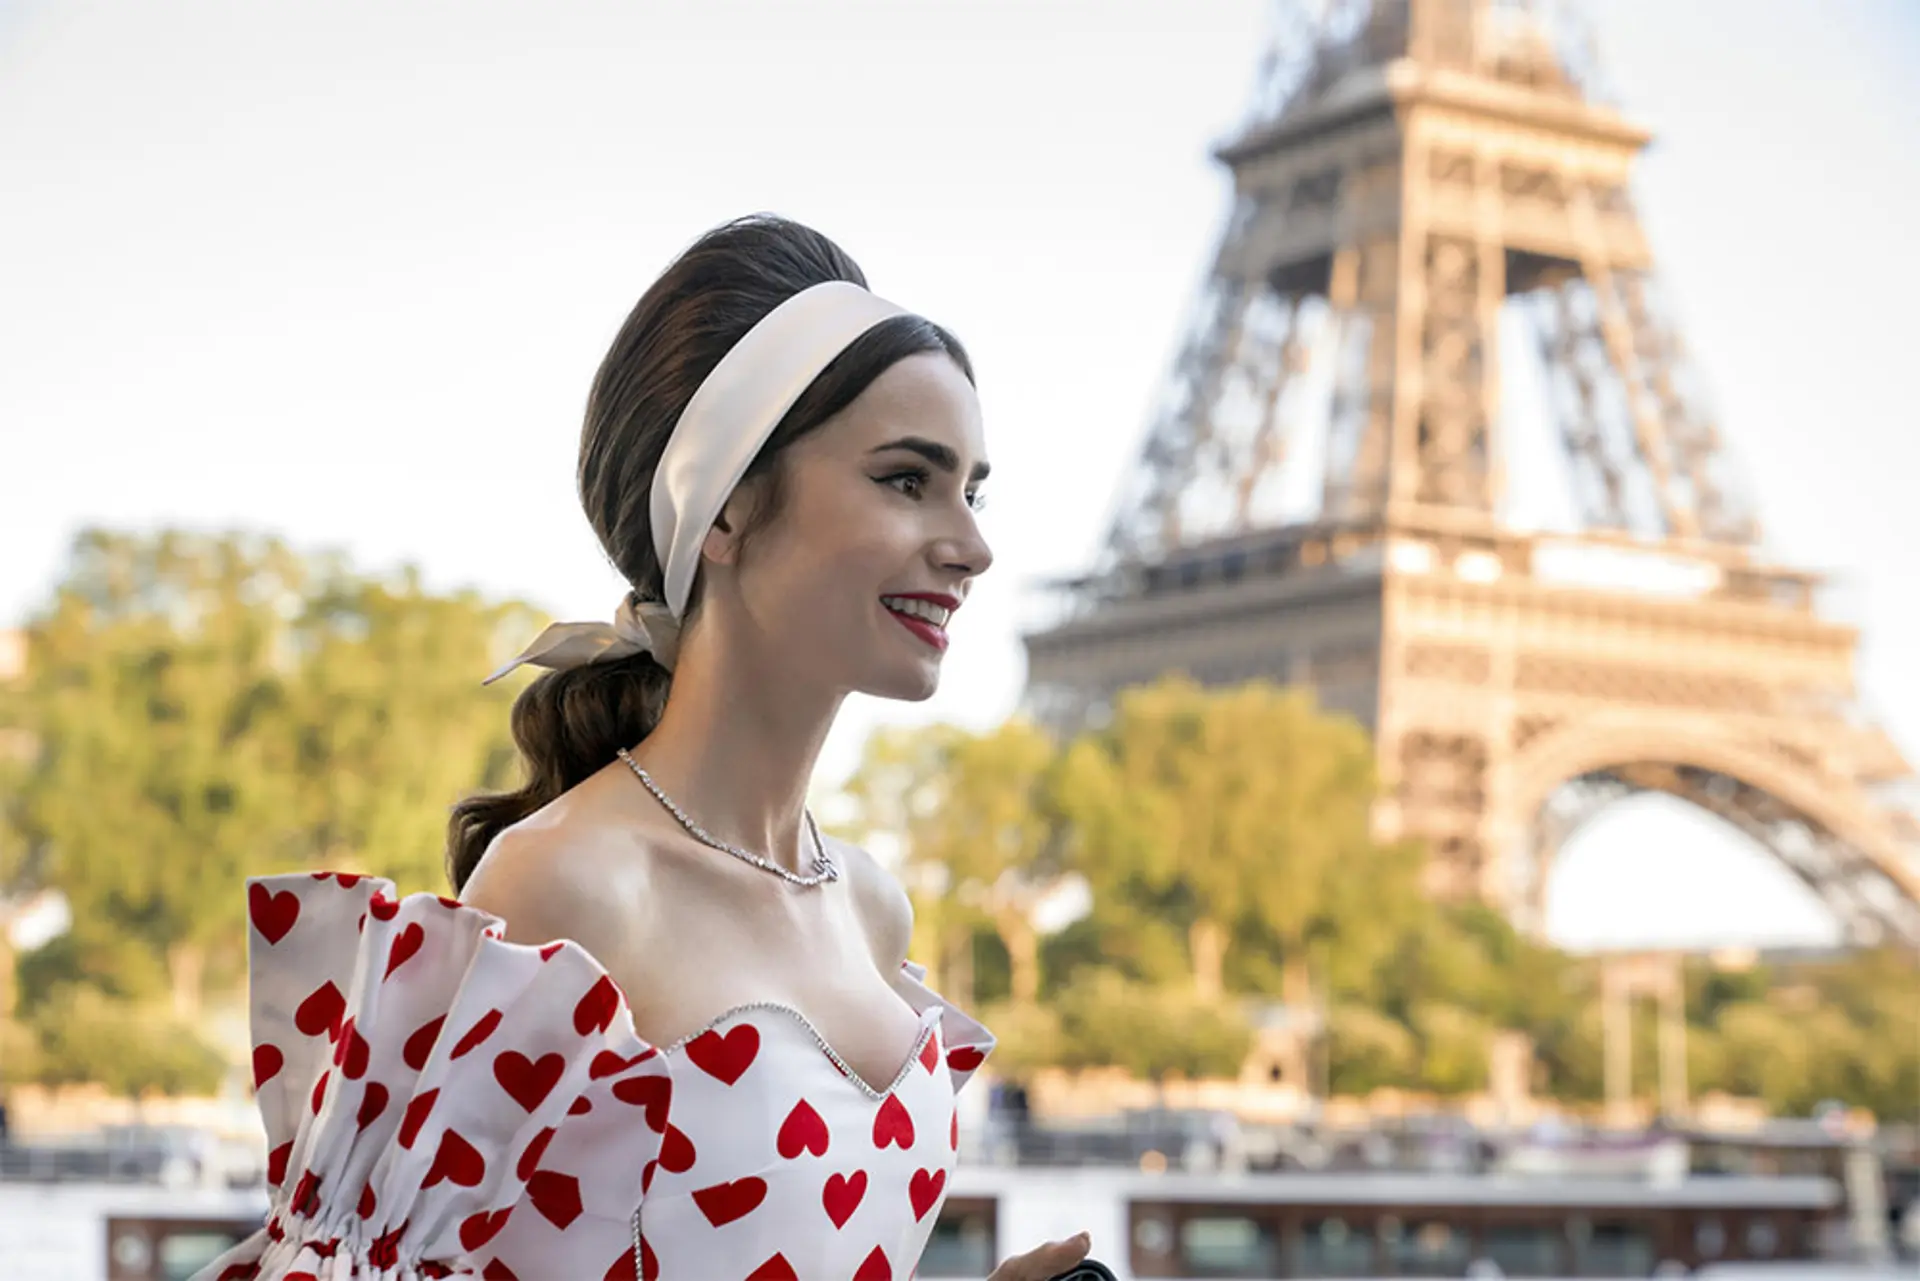 Emily in Paris - her guide to the City of Light